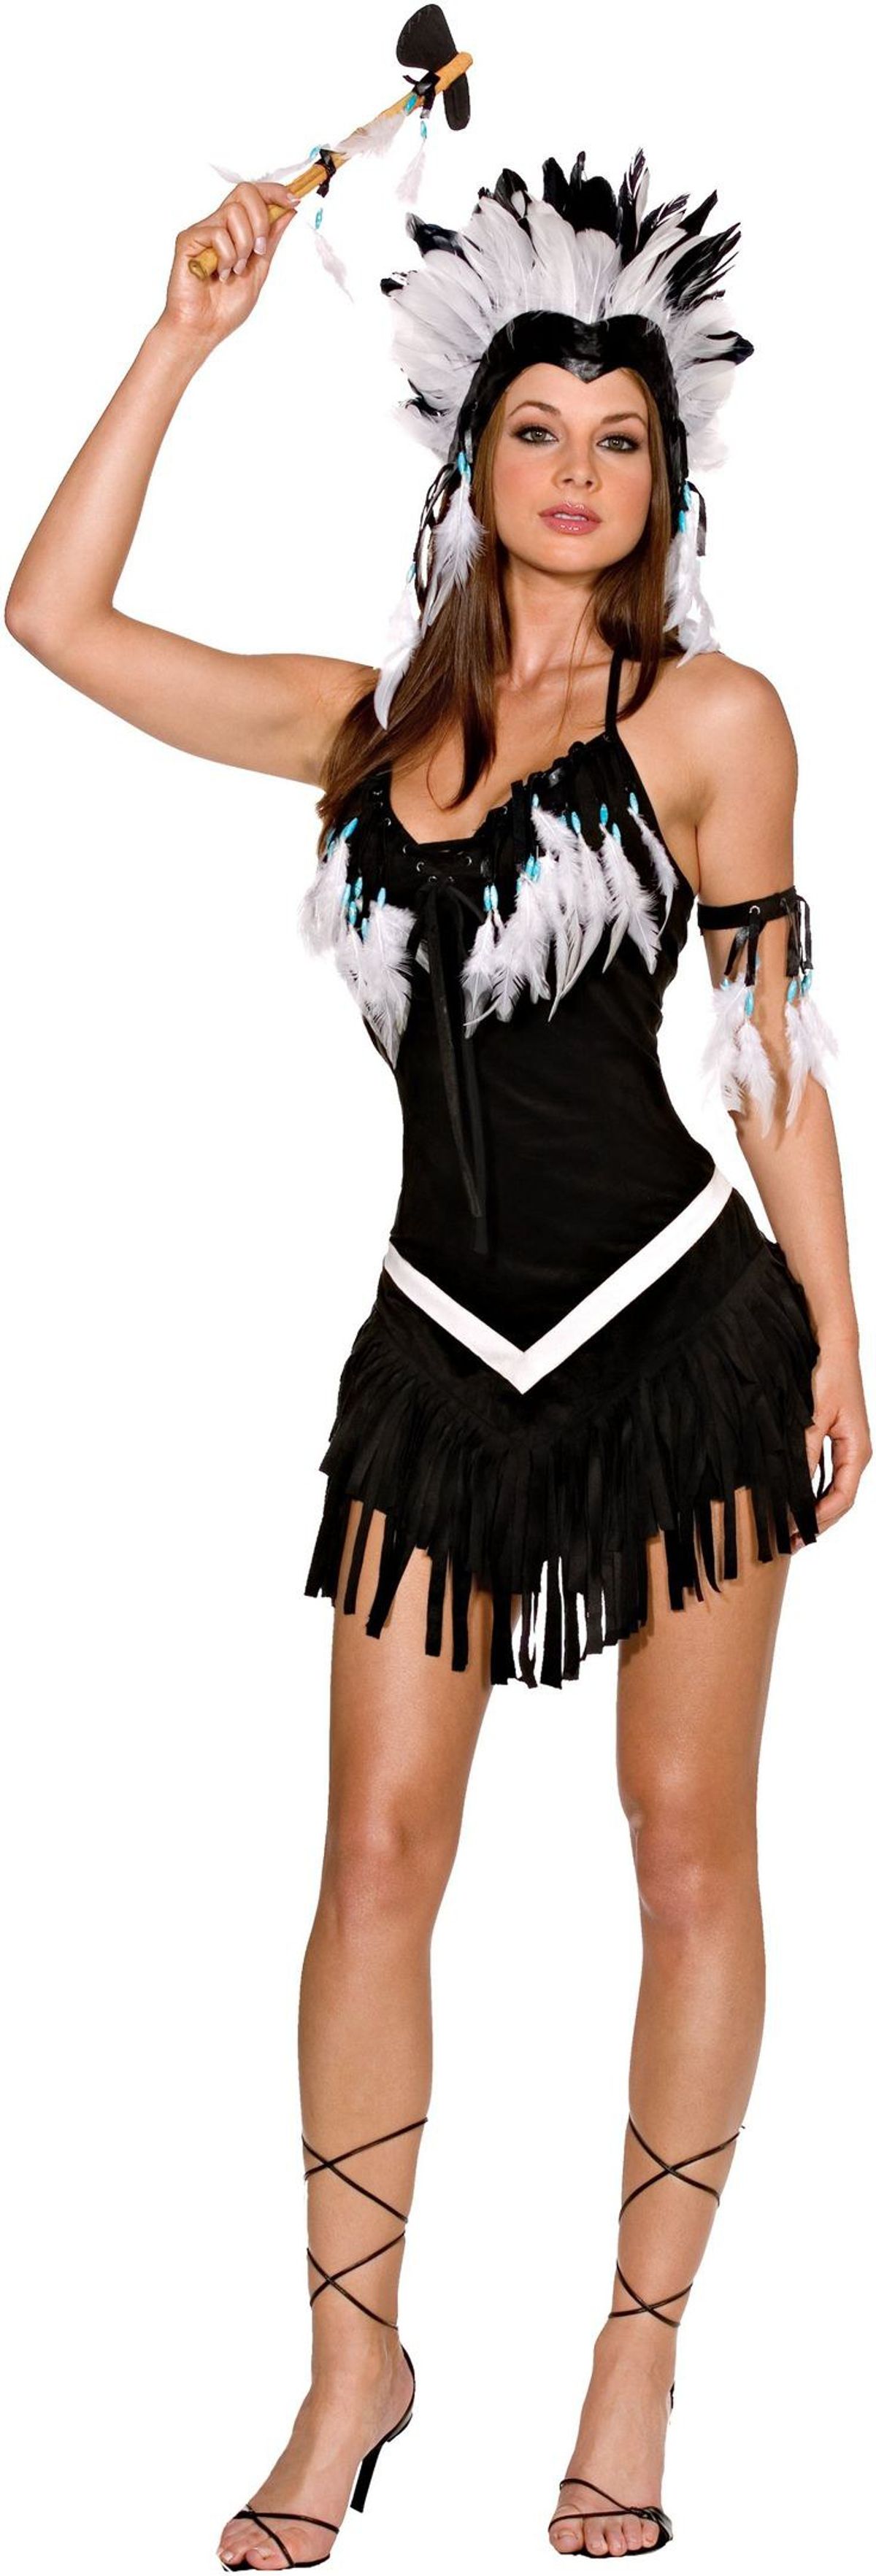 Why the 'Native American Seductress' Costume Needs to DIE